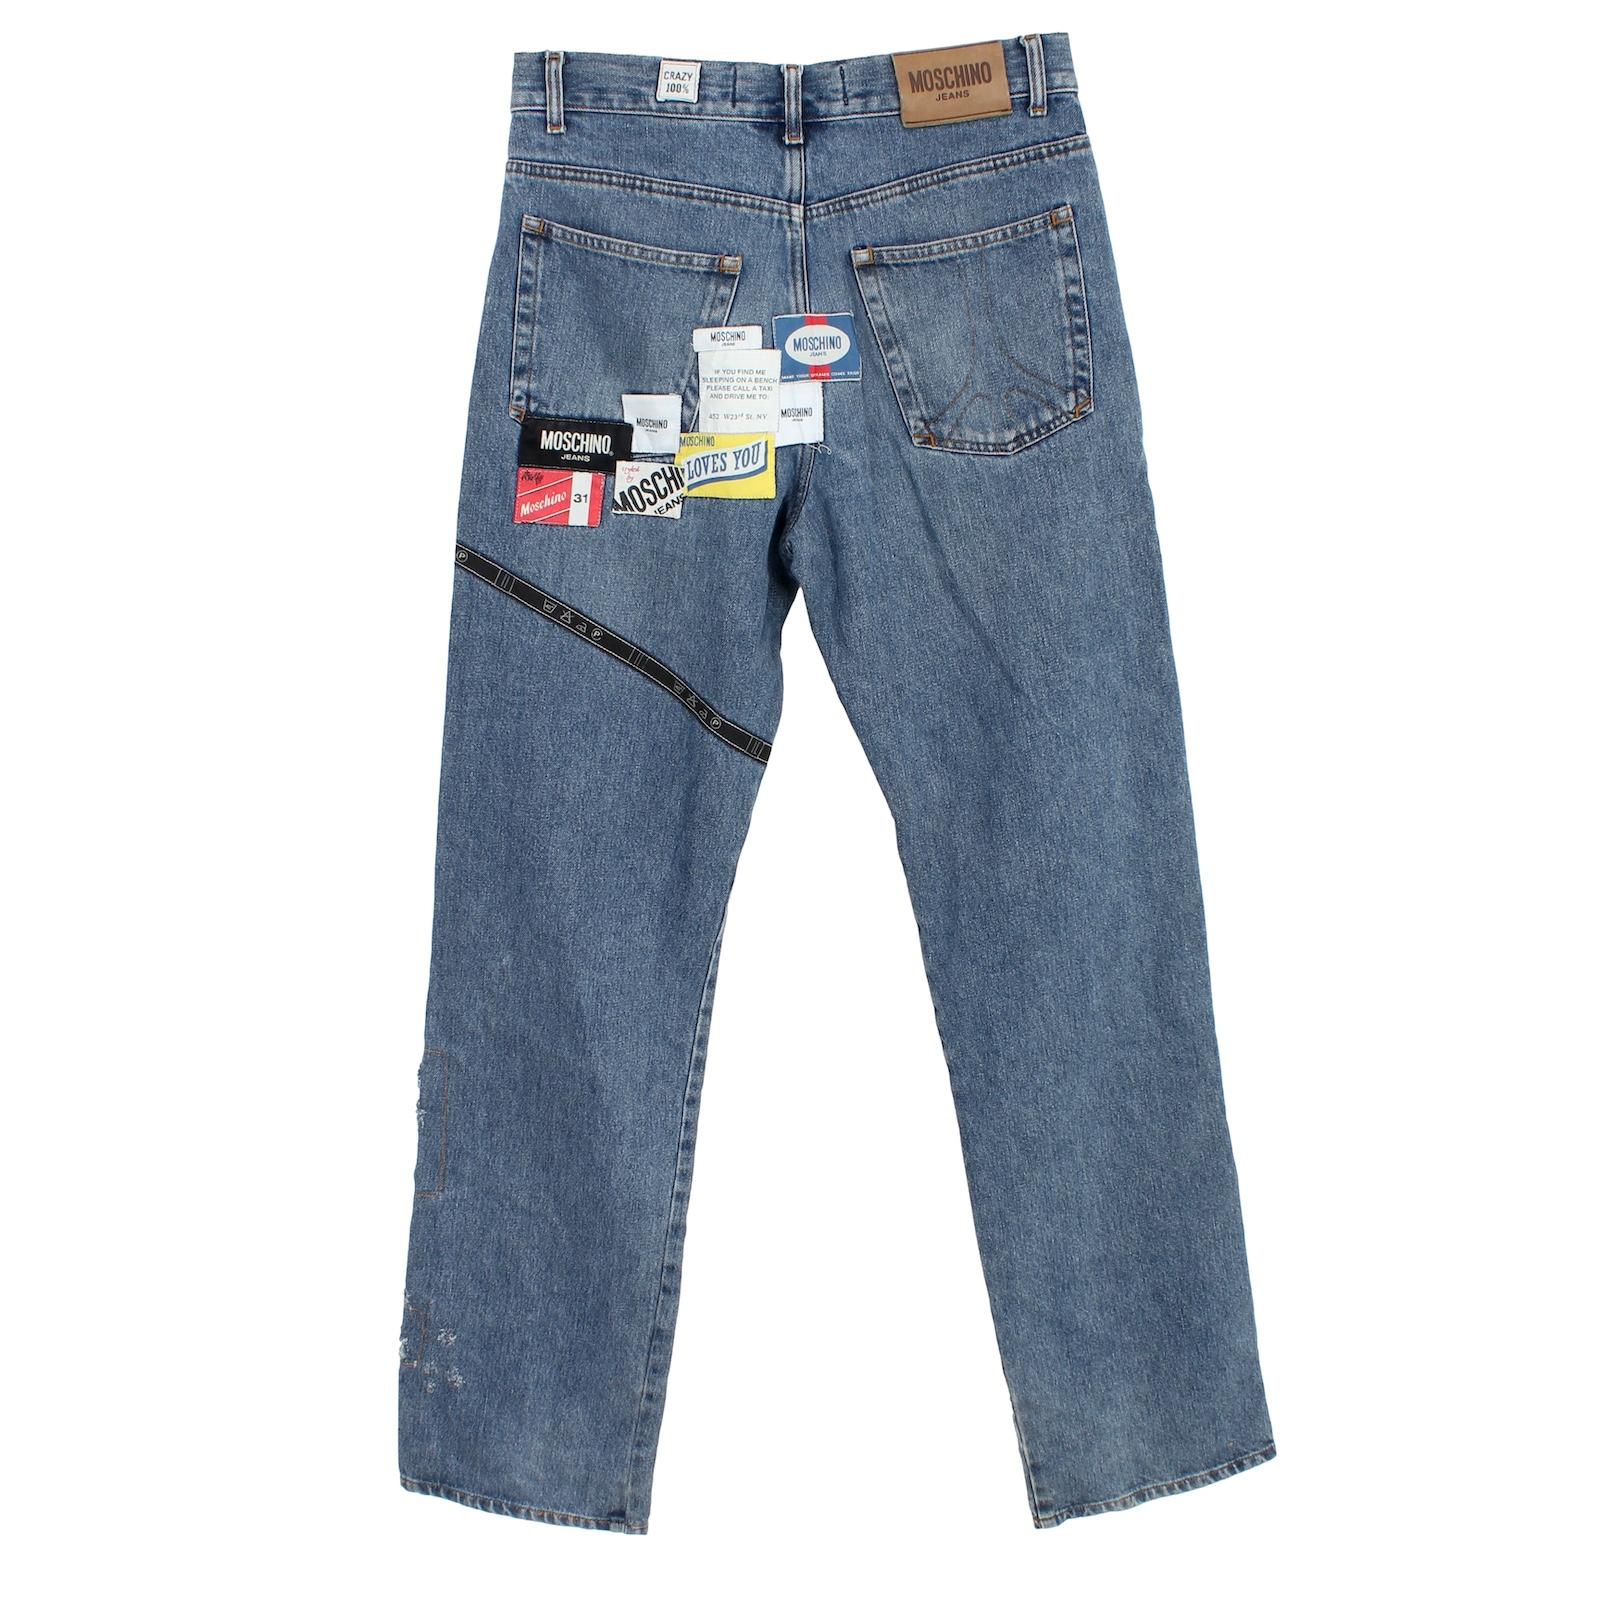 Moschino men's jeans 2000s. Patchwork prints on the front and back of the jeans, 5-pocket model, wide at the bottom. 100% cotton fabric. Made in italy.

Size: 32 / 46 It 12 Us 14 Uk

Waist: 39 cm
Inseam: 84 cm
Length: 110 cm
Hem: 21 cm
